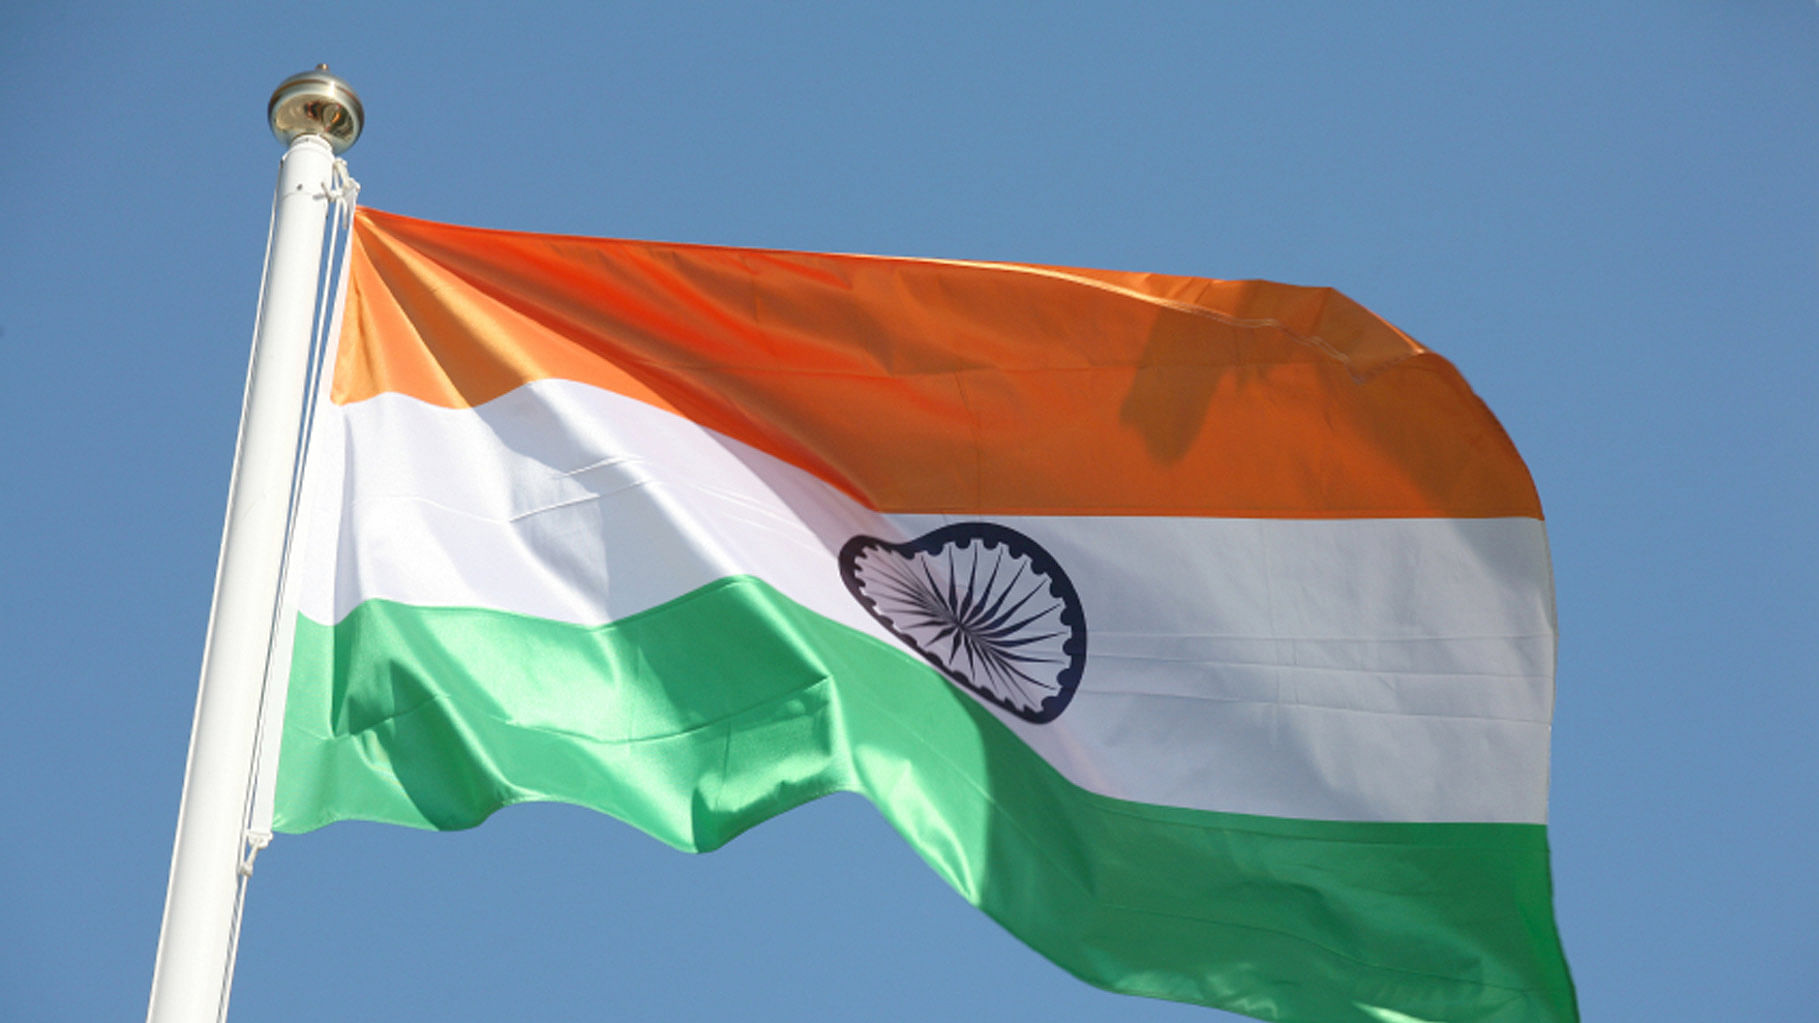 Chief Minister Devendra Fadnavis is likely to attend the flag hoisting ceremony on 1 May.  (Photo: iStockPhoto)